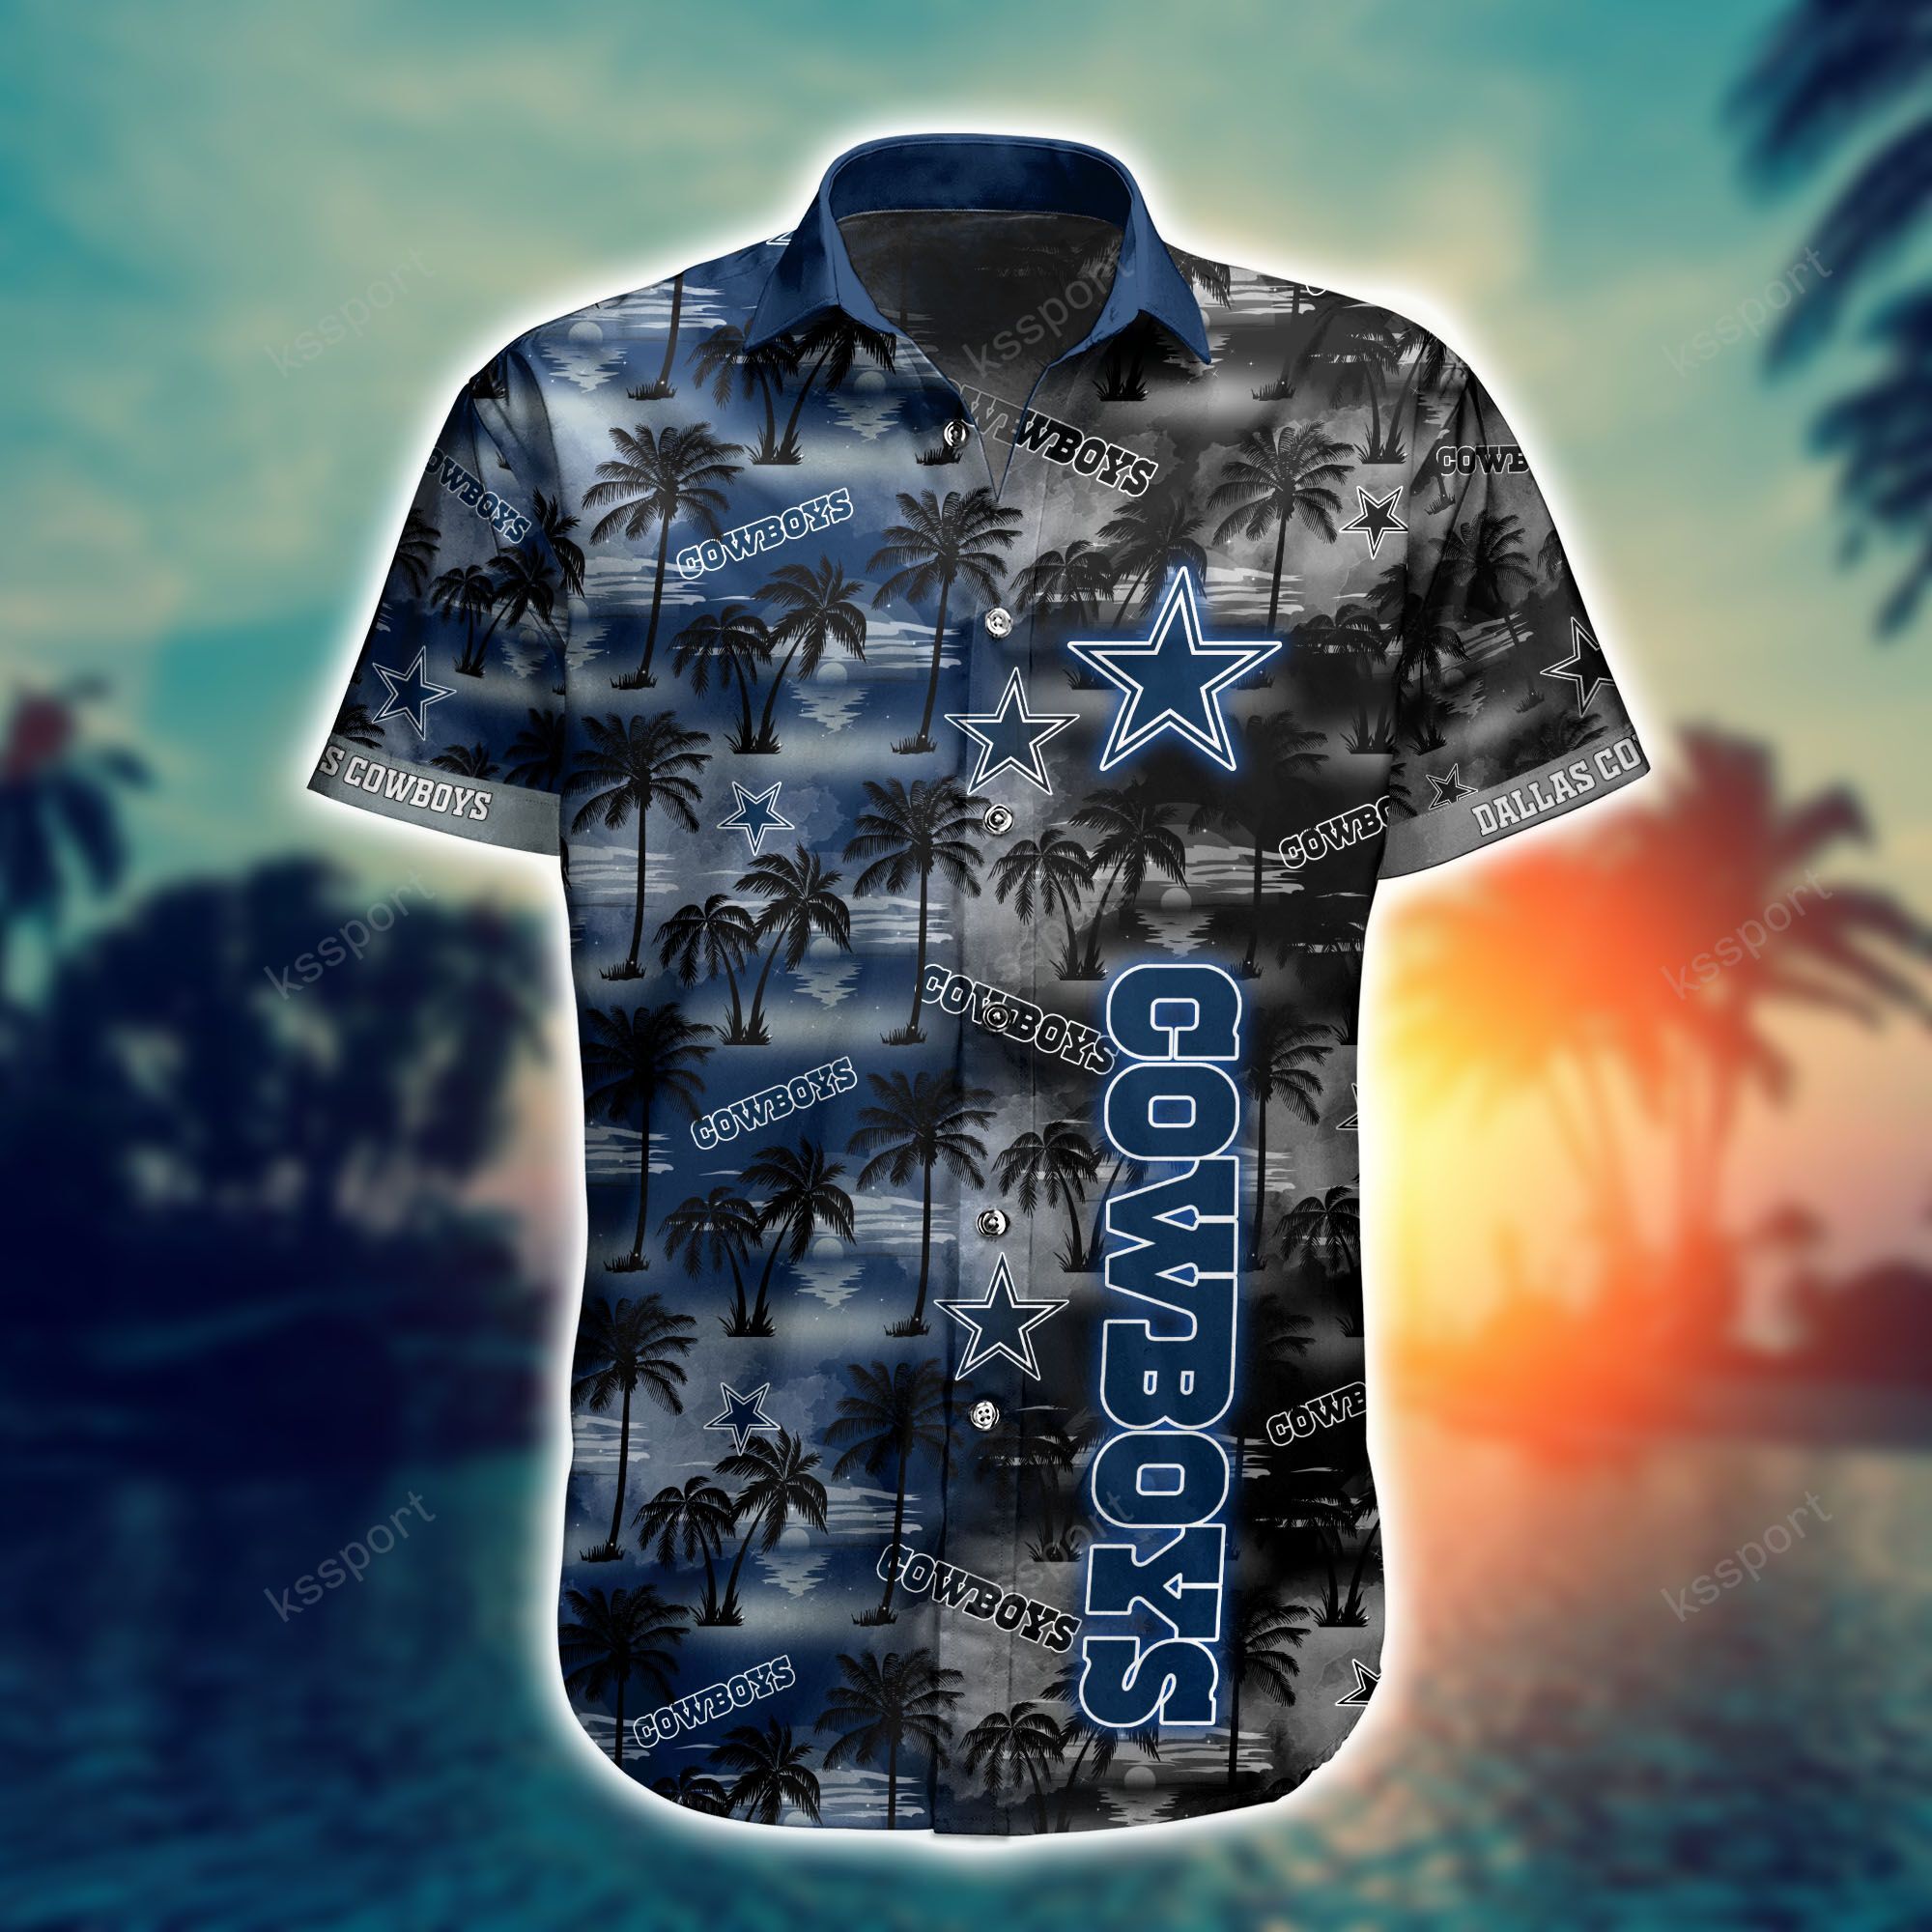 Top cool Hawaiian shirt 2022 - Make sure you get yours today before they run out! 214